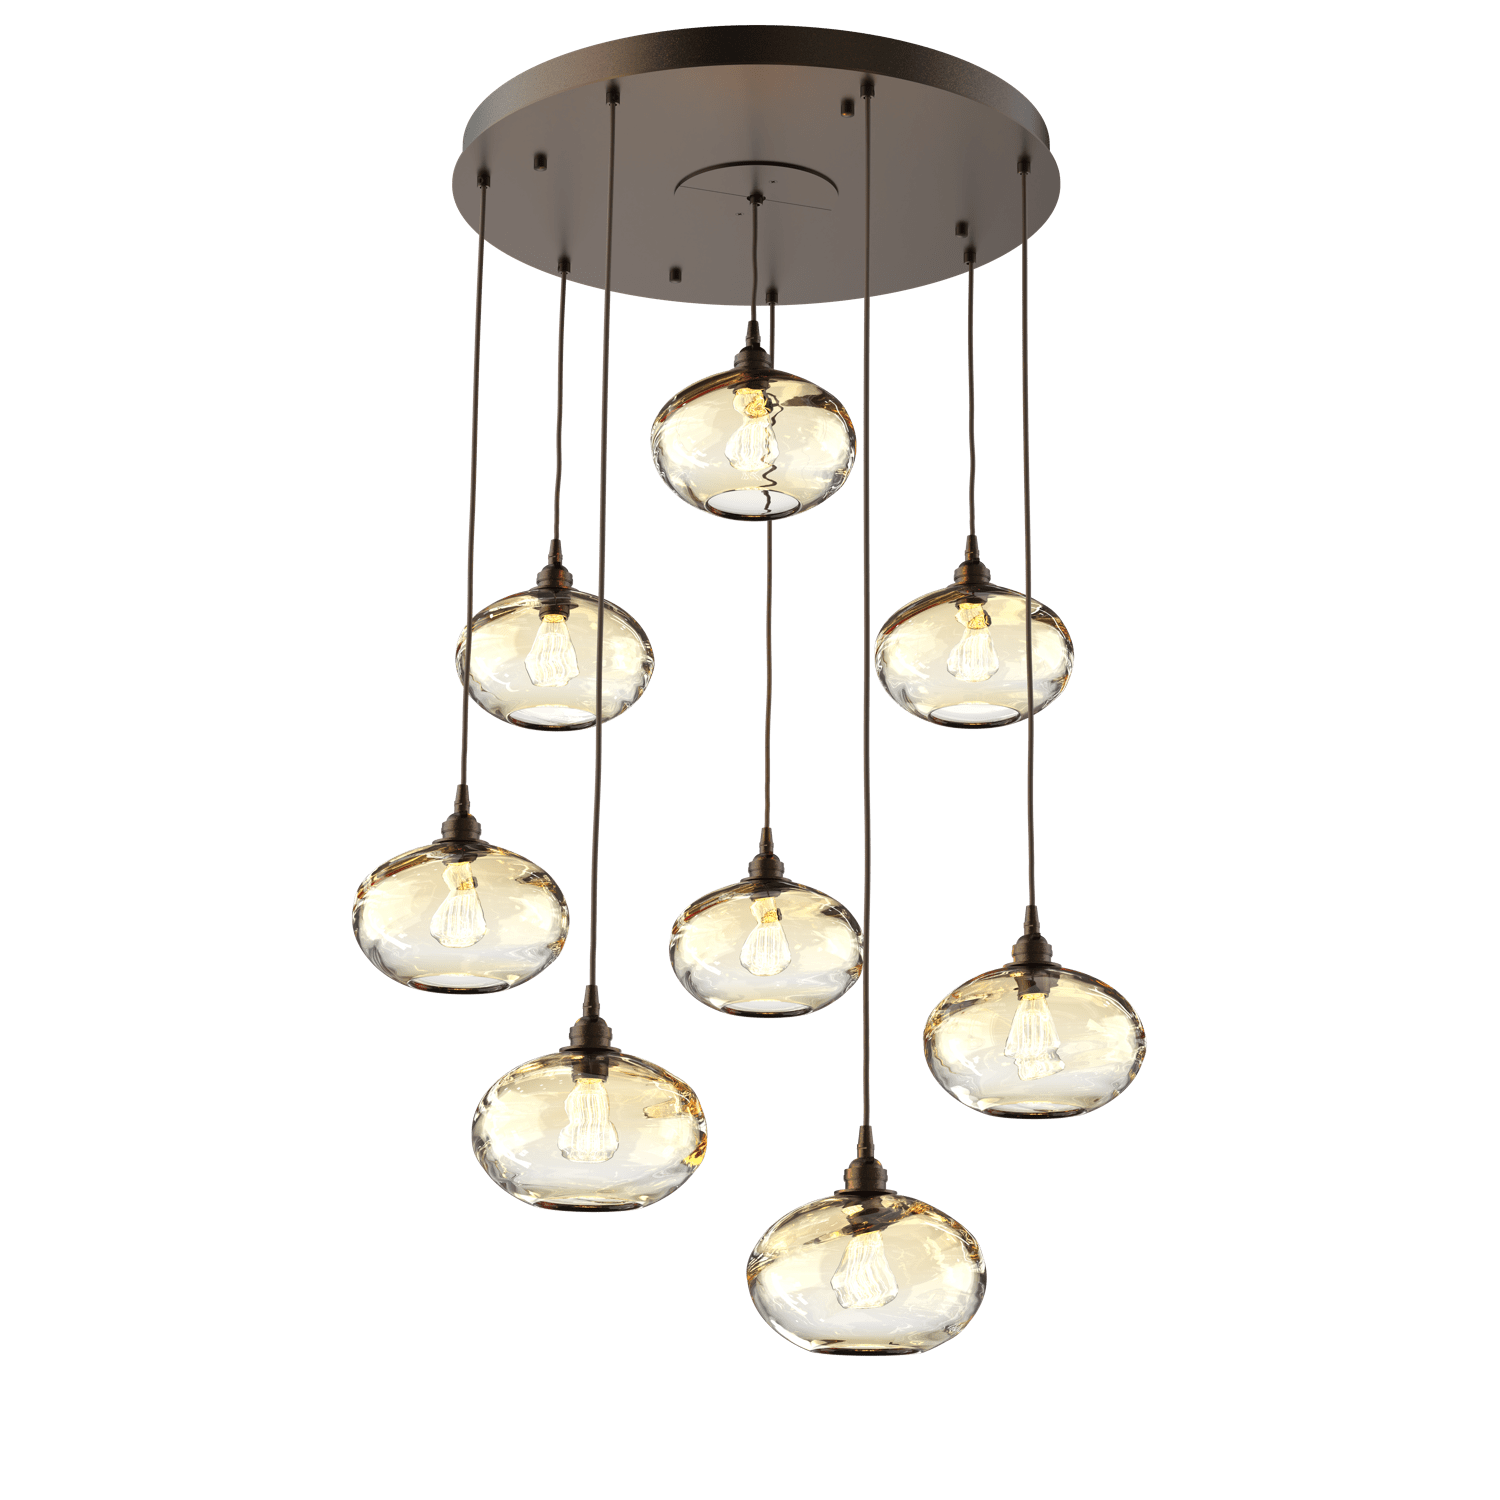 CHB0036-08-FB-OA-Hammerton-Studio-Optic-Blown-Glass-Coppa-8-light-round-pendant-chandelier-with-flat-bronze-finish-and-optic-amber-blown-glass-shades-and-incandescent-lamping